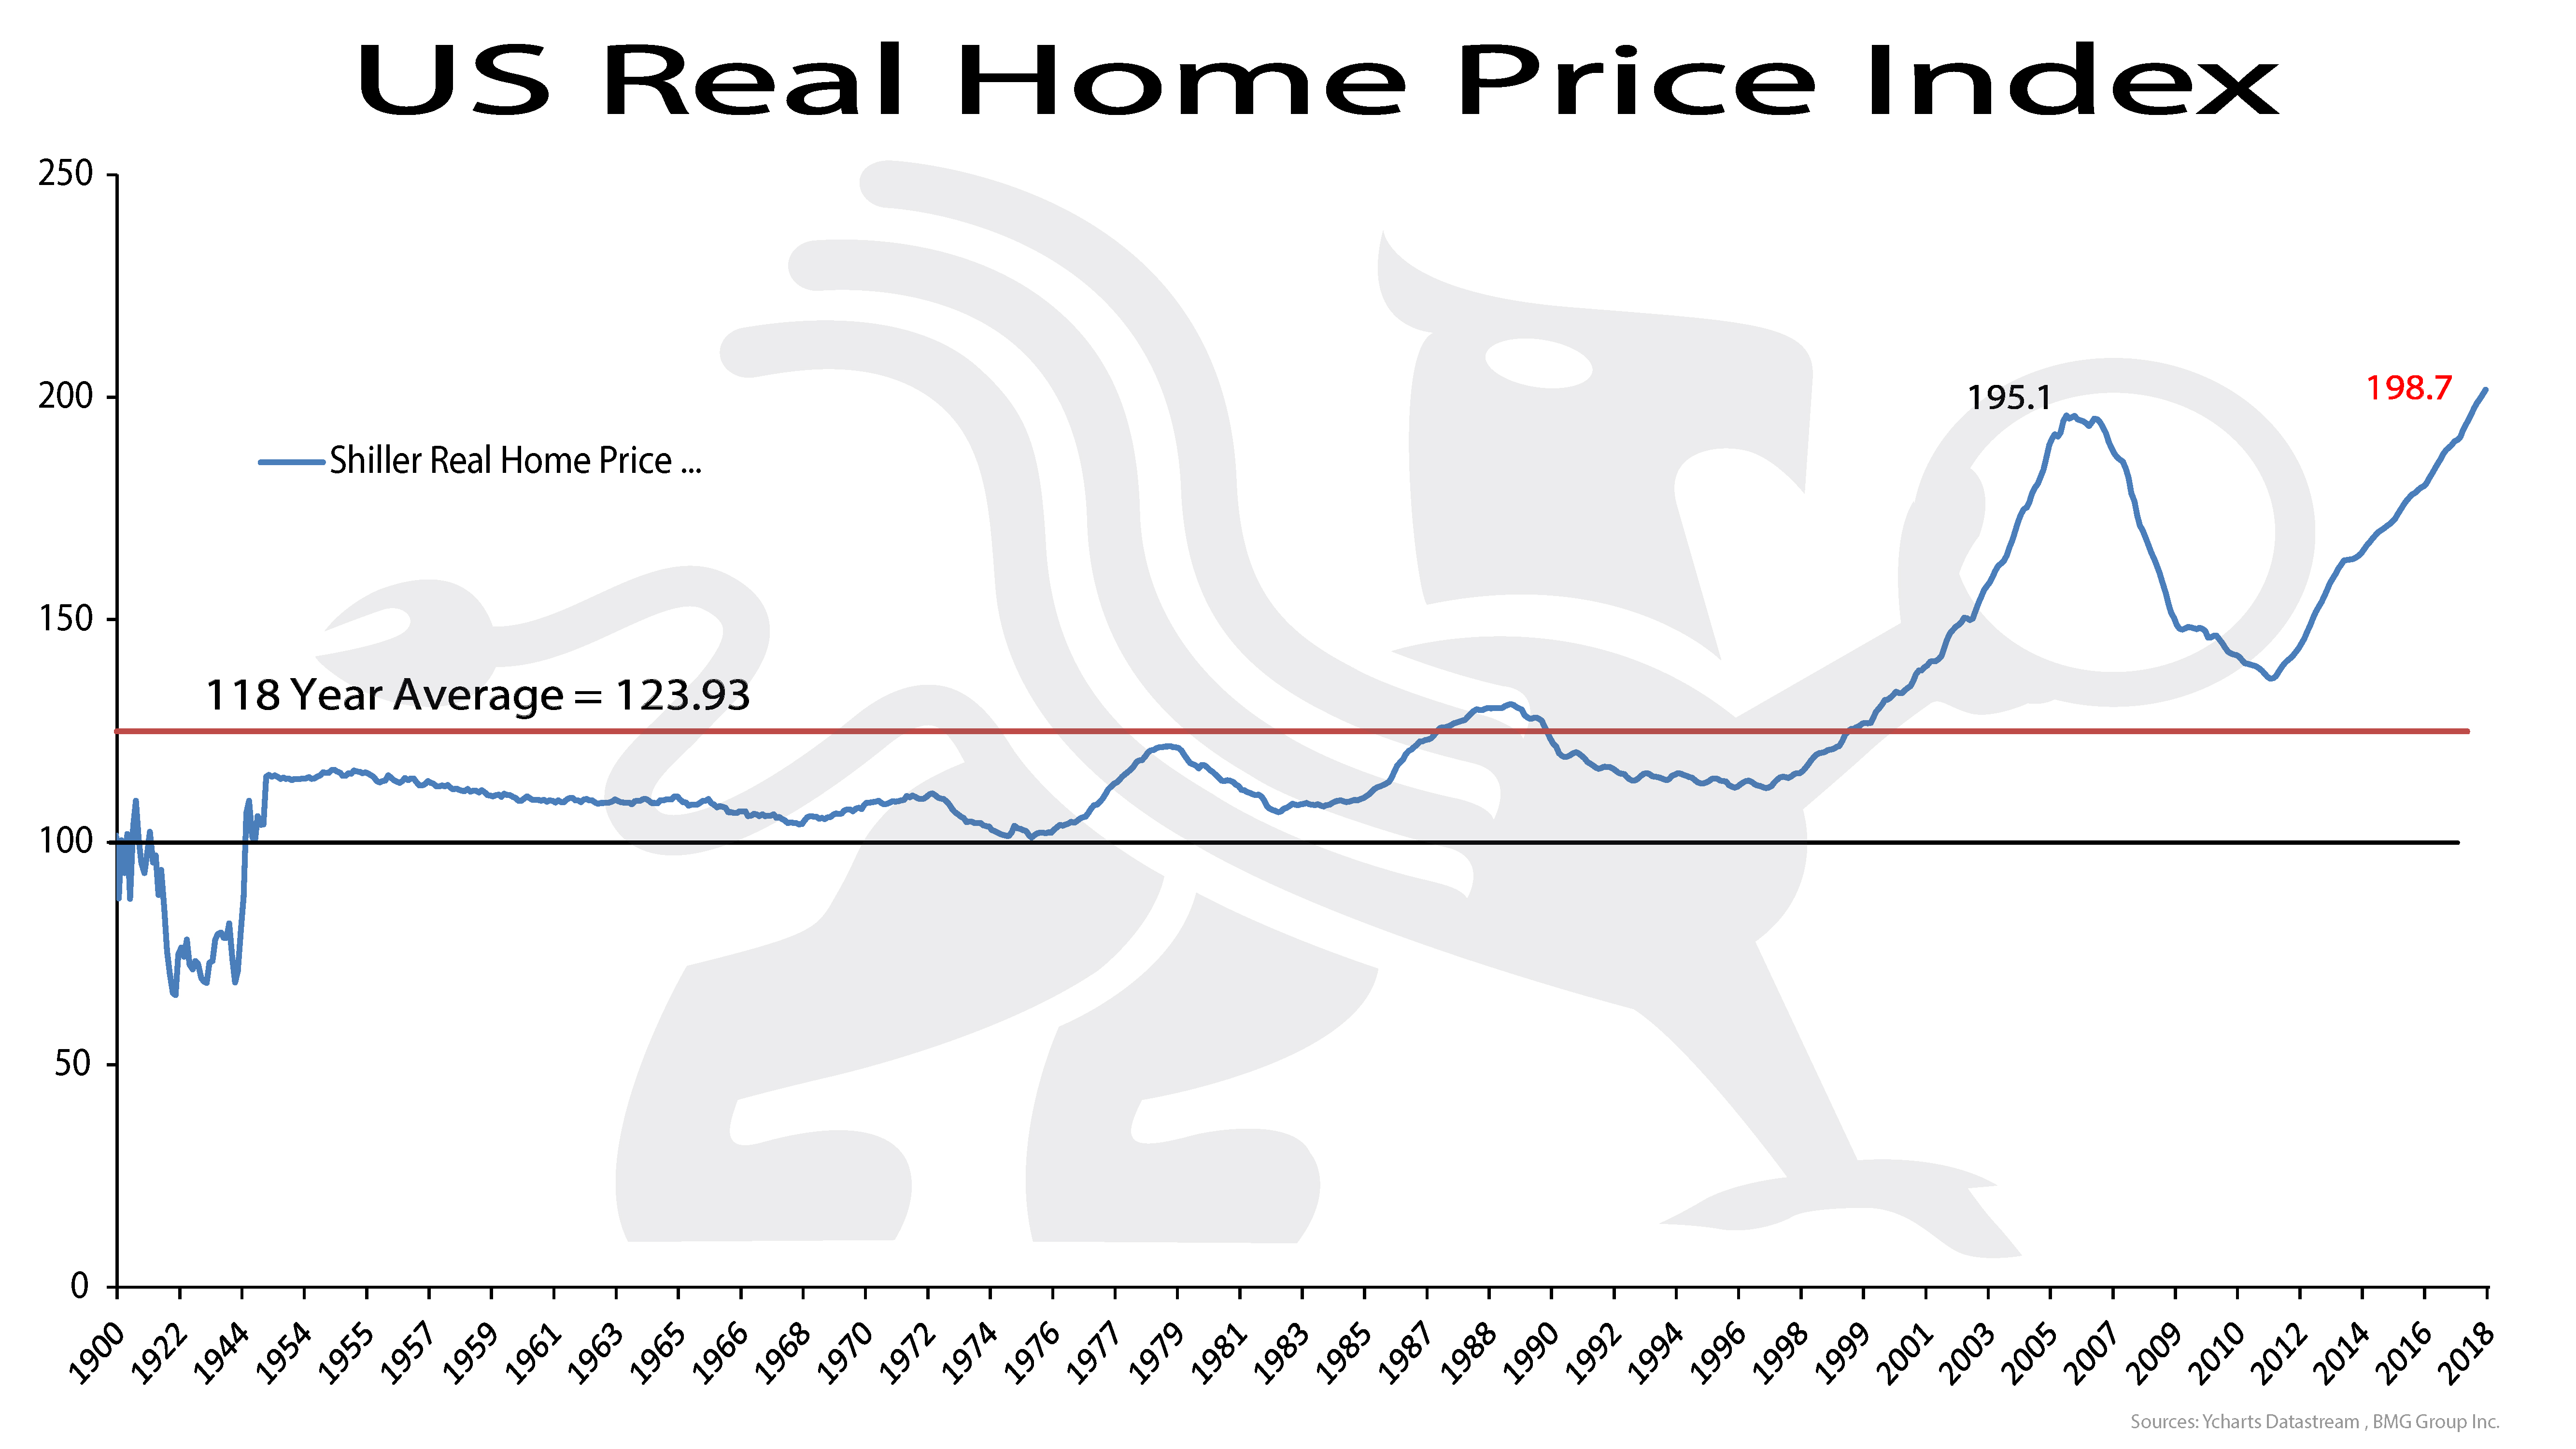 US Real Home Price Index | BullionBuzz Chart of the Week | BMG